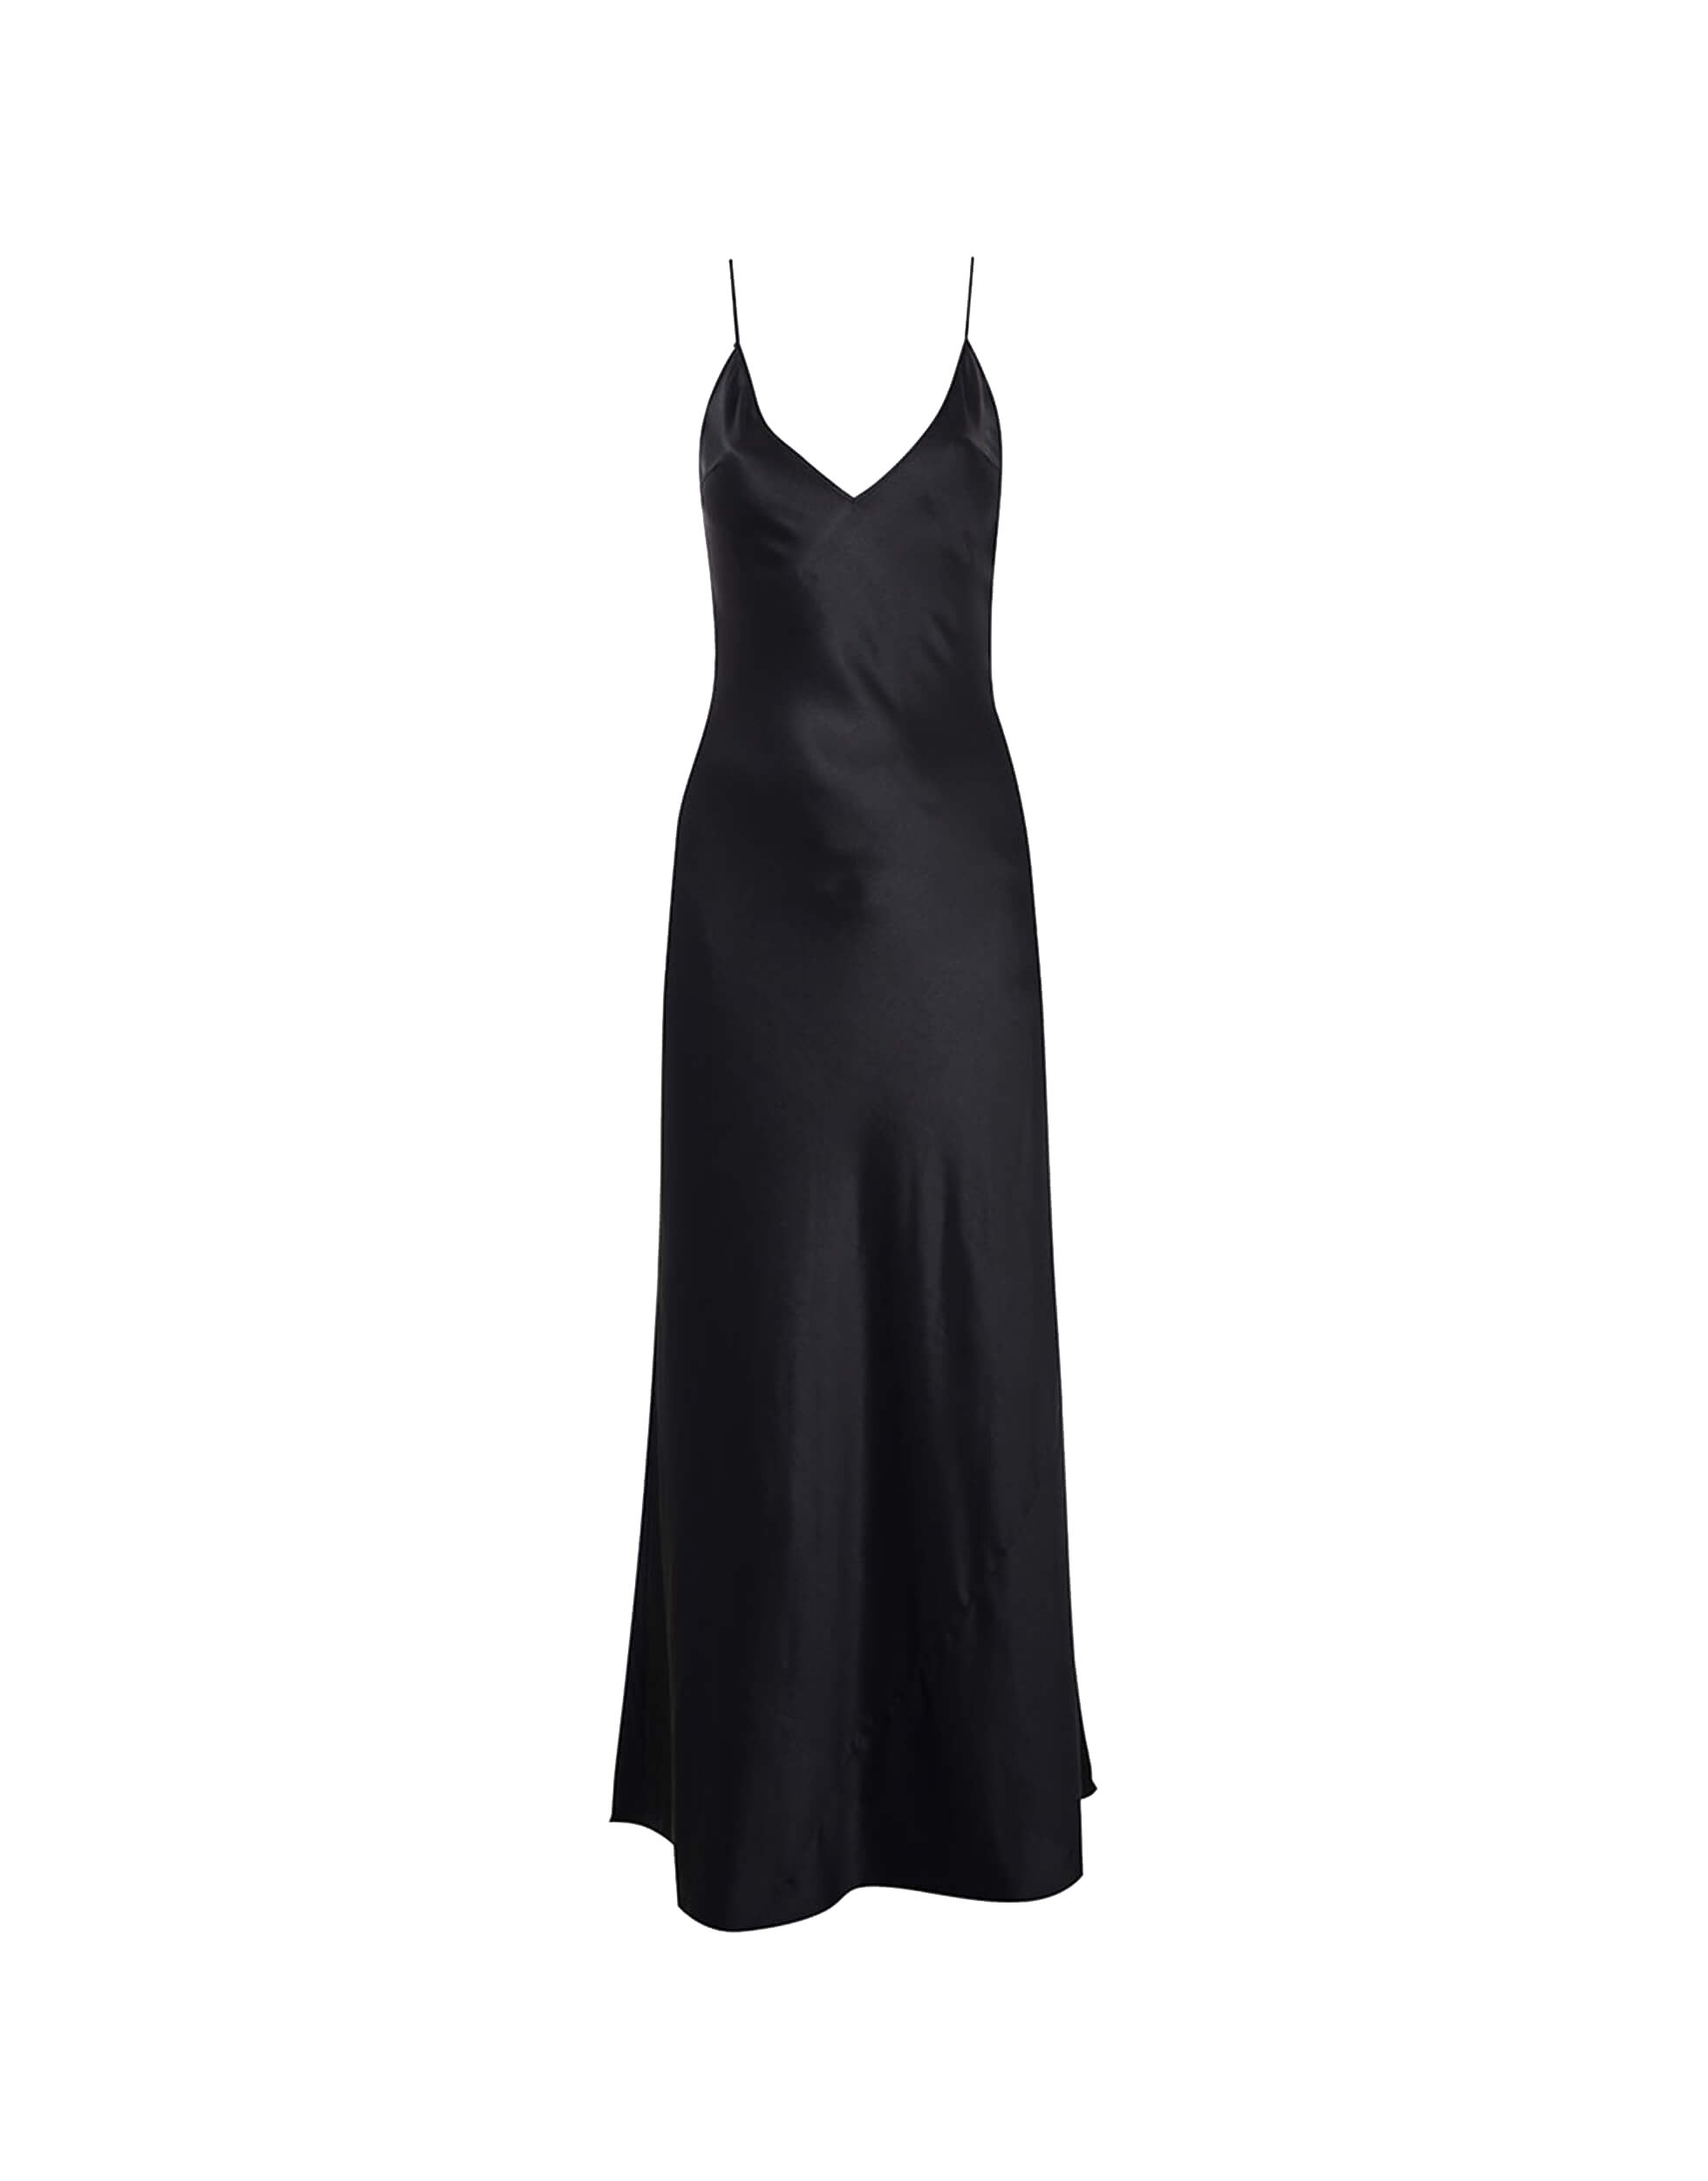 Cozimia Long Slip in Black | By Agent Provocateur